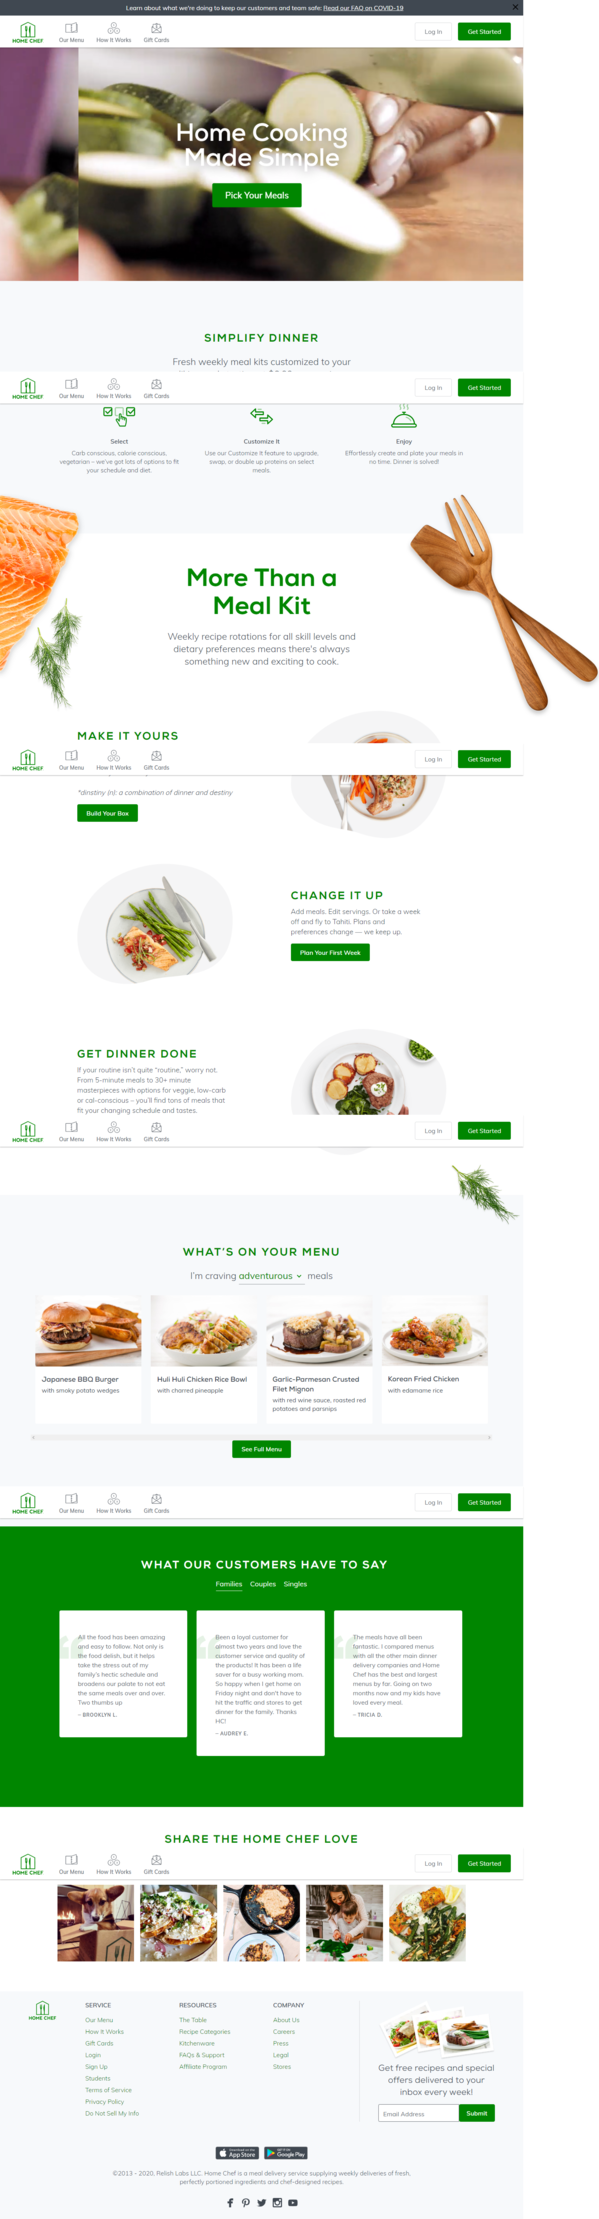 Meal Delivery Service - Fresh Weekly Meal Kit Delivery - Home Chef.png